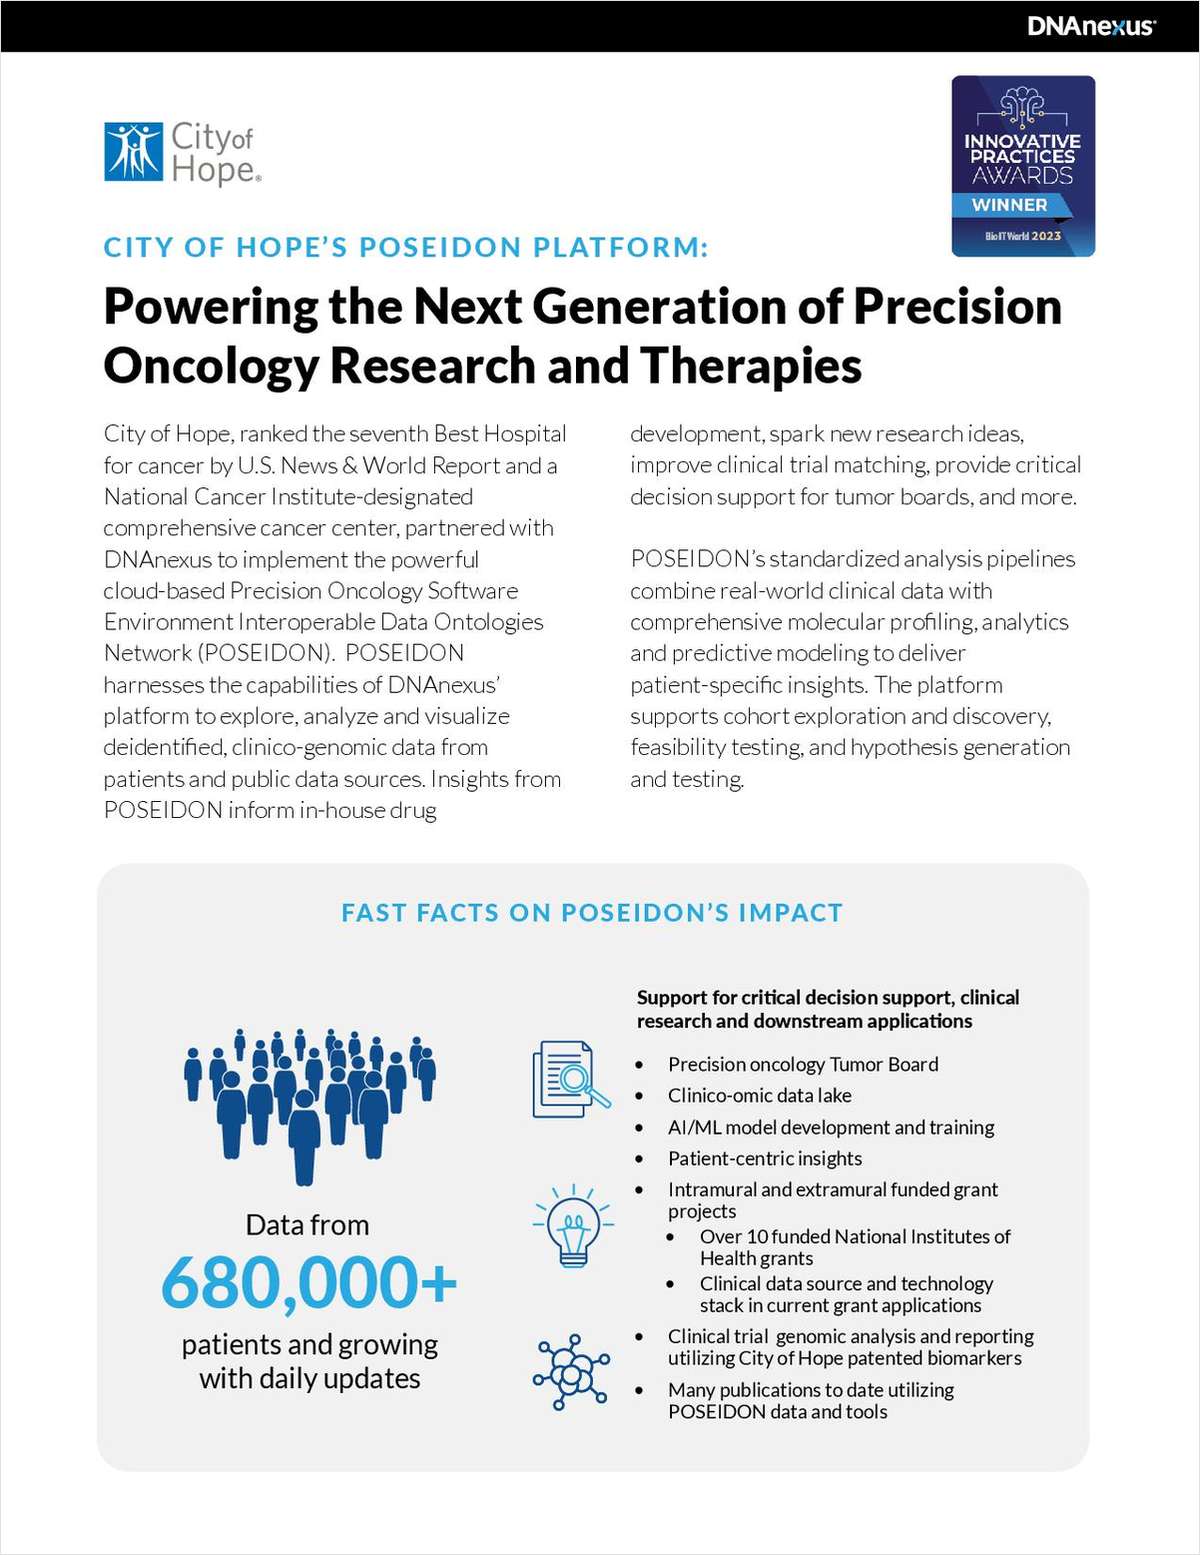 City of Hope's POSEIDON Platform: Powering the Next Generation of Precision Oncology Research and Therapies